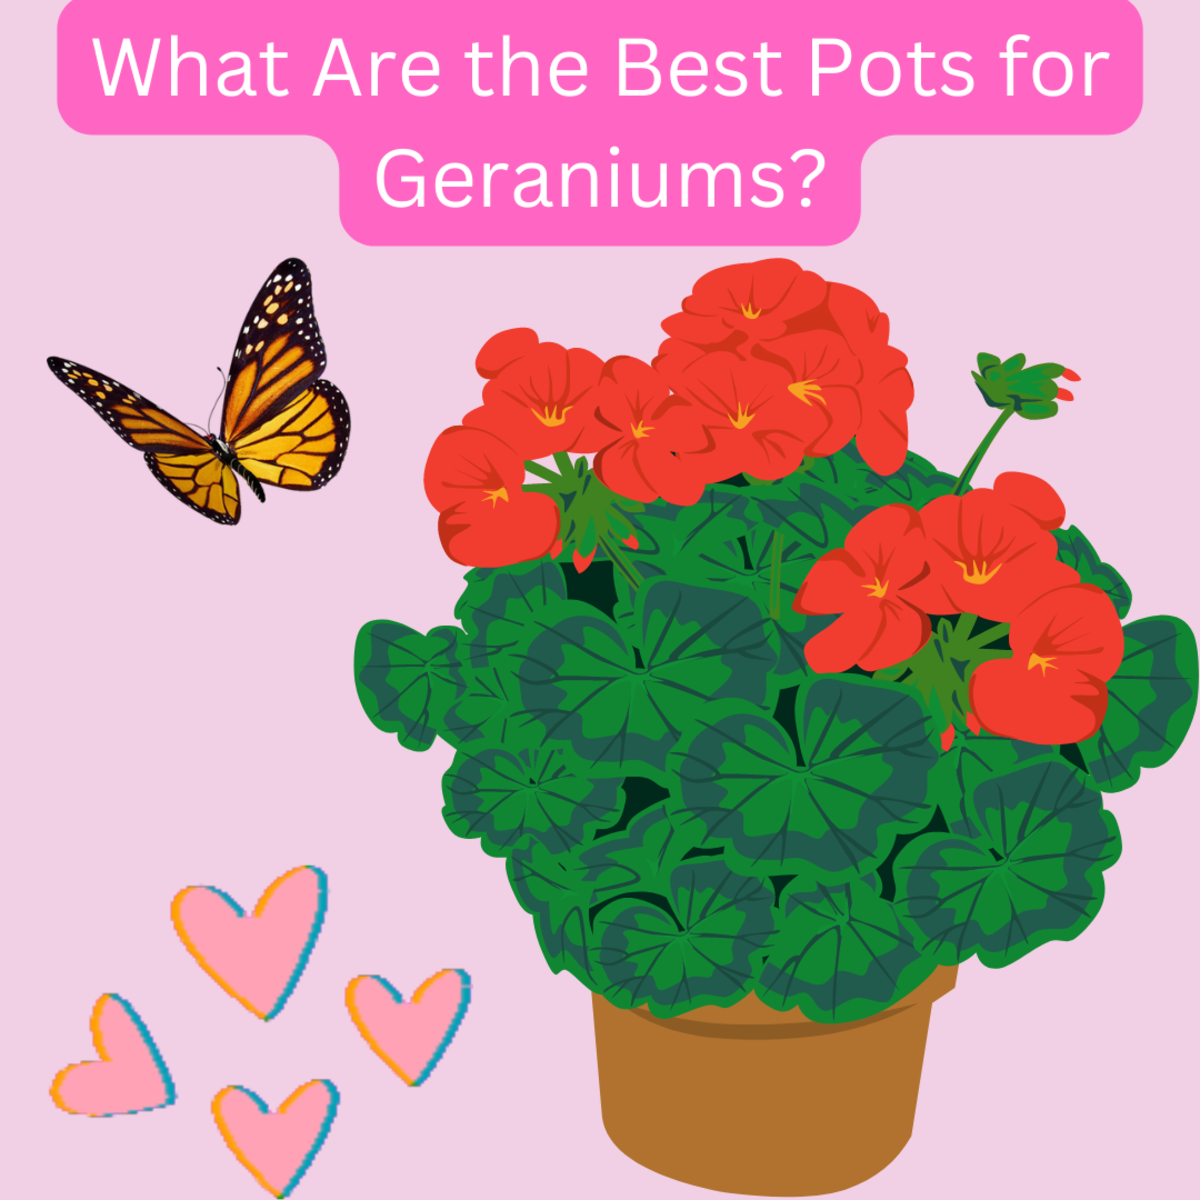 What Are the Best Pots for Geraniums (Pelargoniums)?